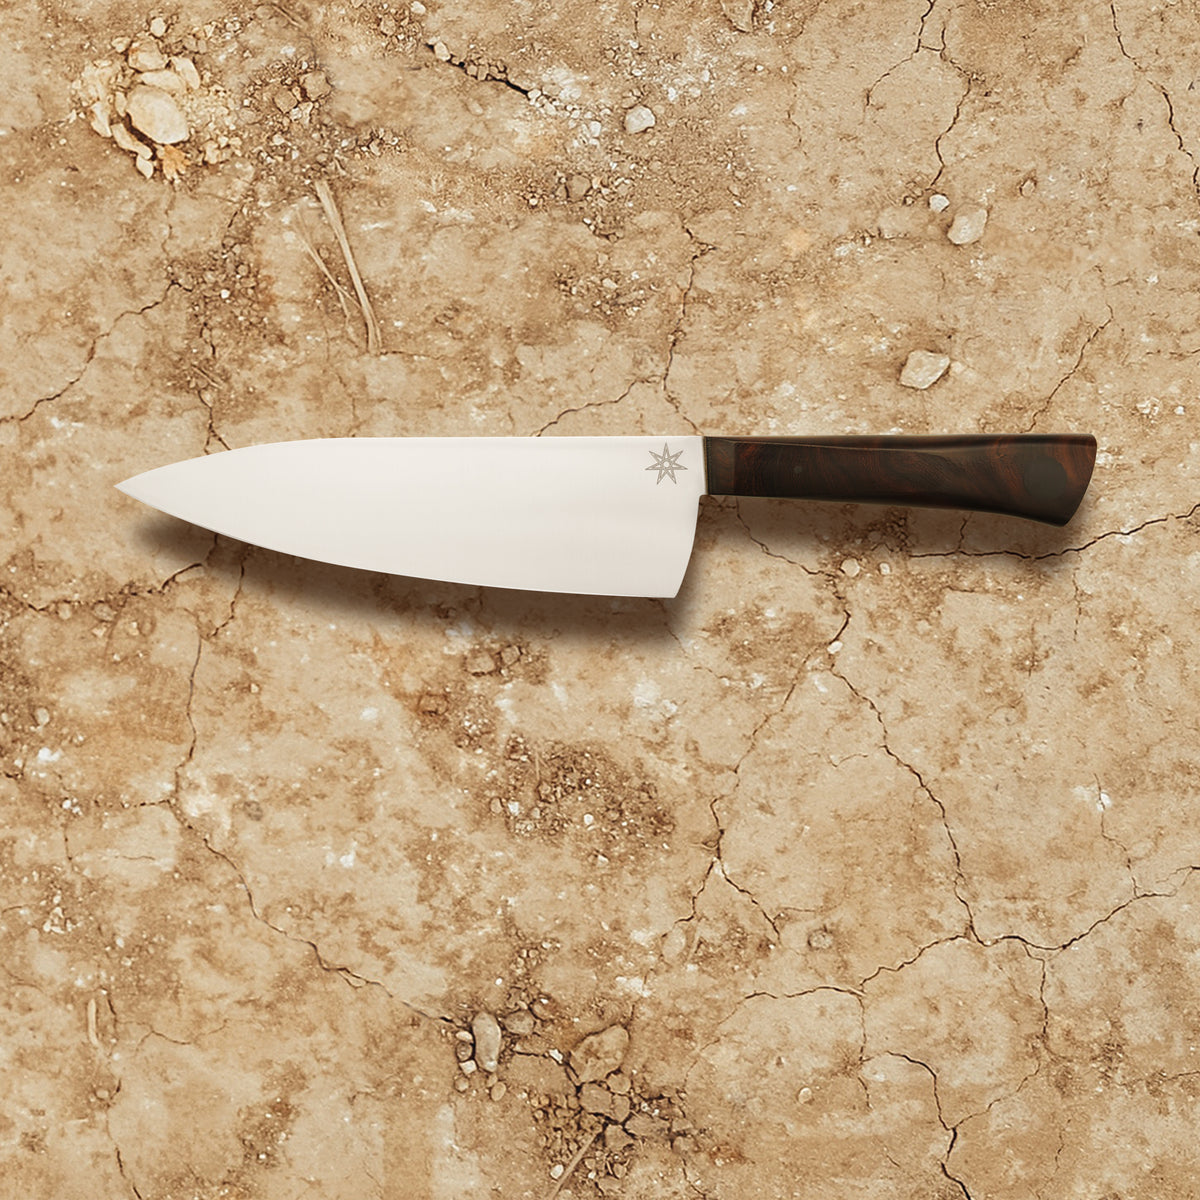 7" chef knife for those who prefer a slightly smaller chef knife. Made with stainless steel and desert ironwood. Kitchen knife with wood handle and branch design and star engraved on blade.